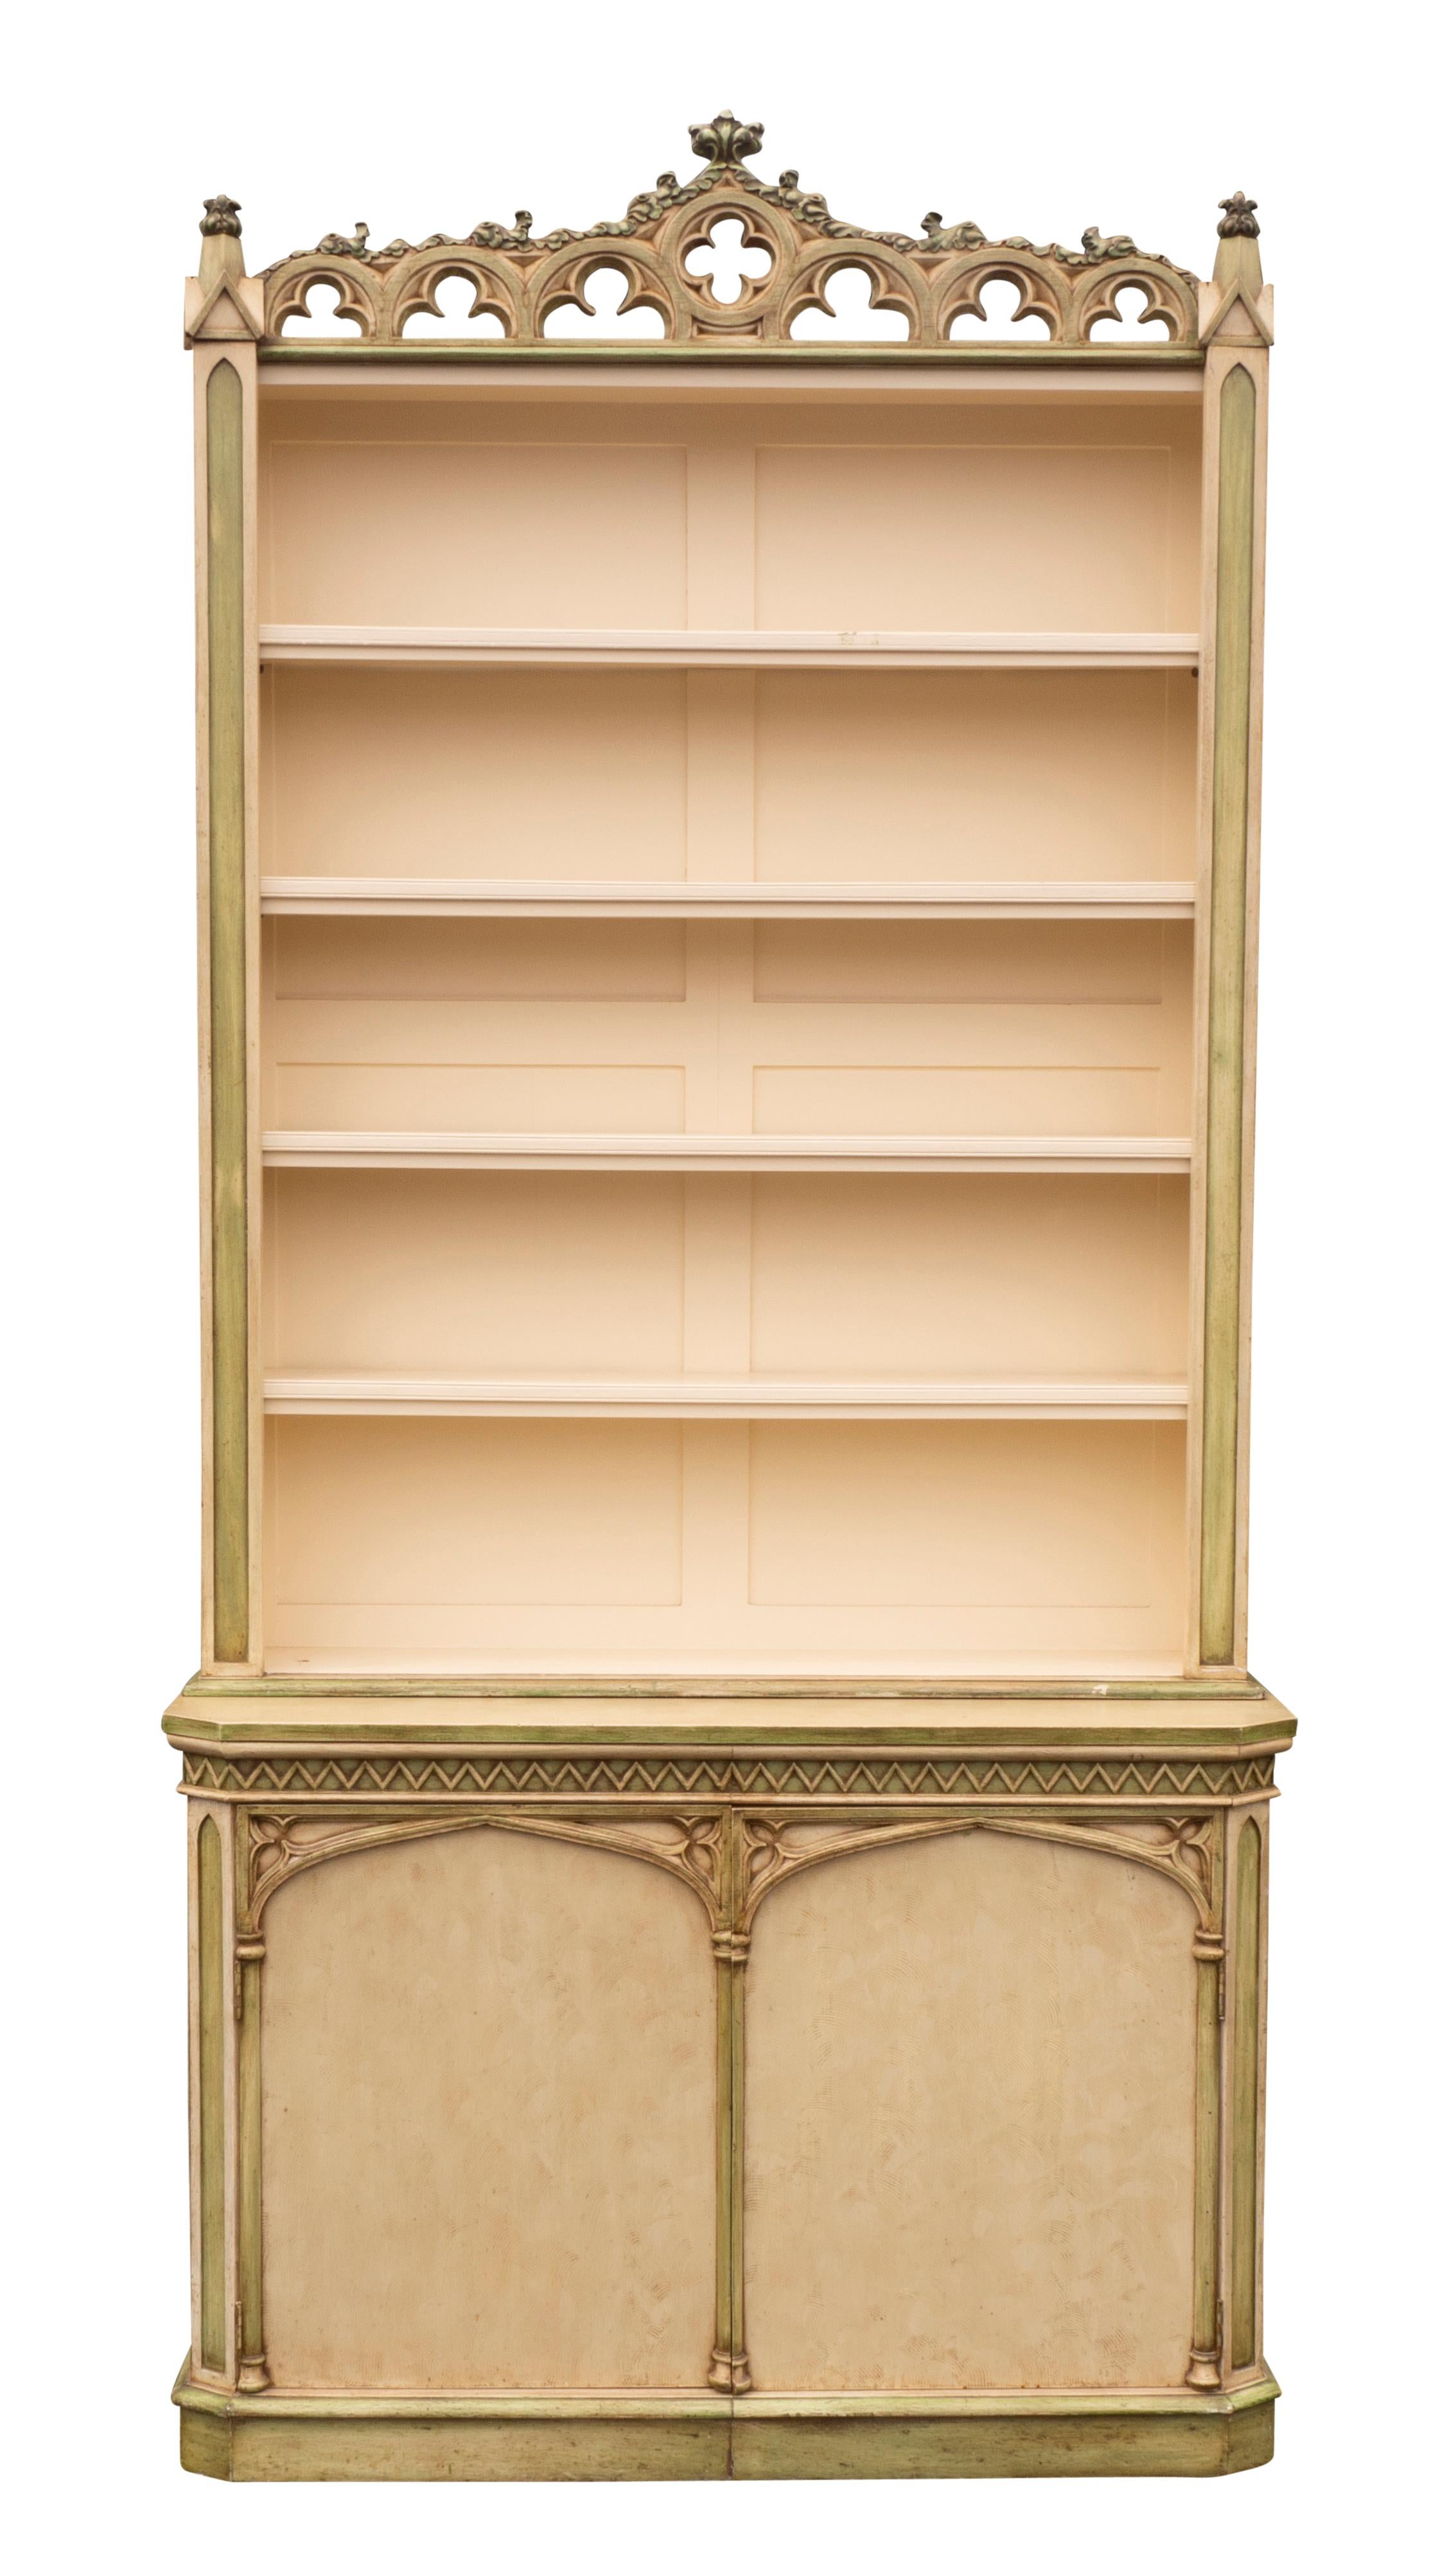 One 4.25 inches wider than the other. Each with a pierced and carved gothic cornice over an open bookcase with four adjustable shelves. The base with a carved frieze with sawtooth design and a pair of gothic design paneled doors opening to shelving.